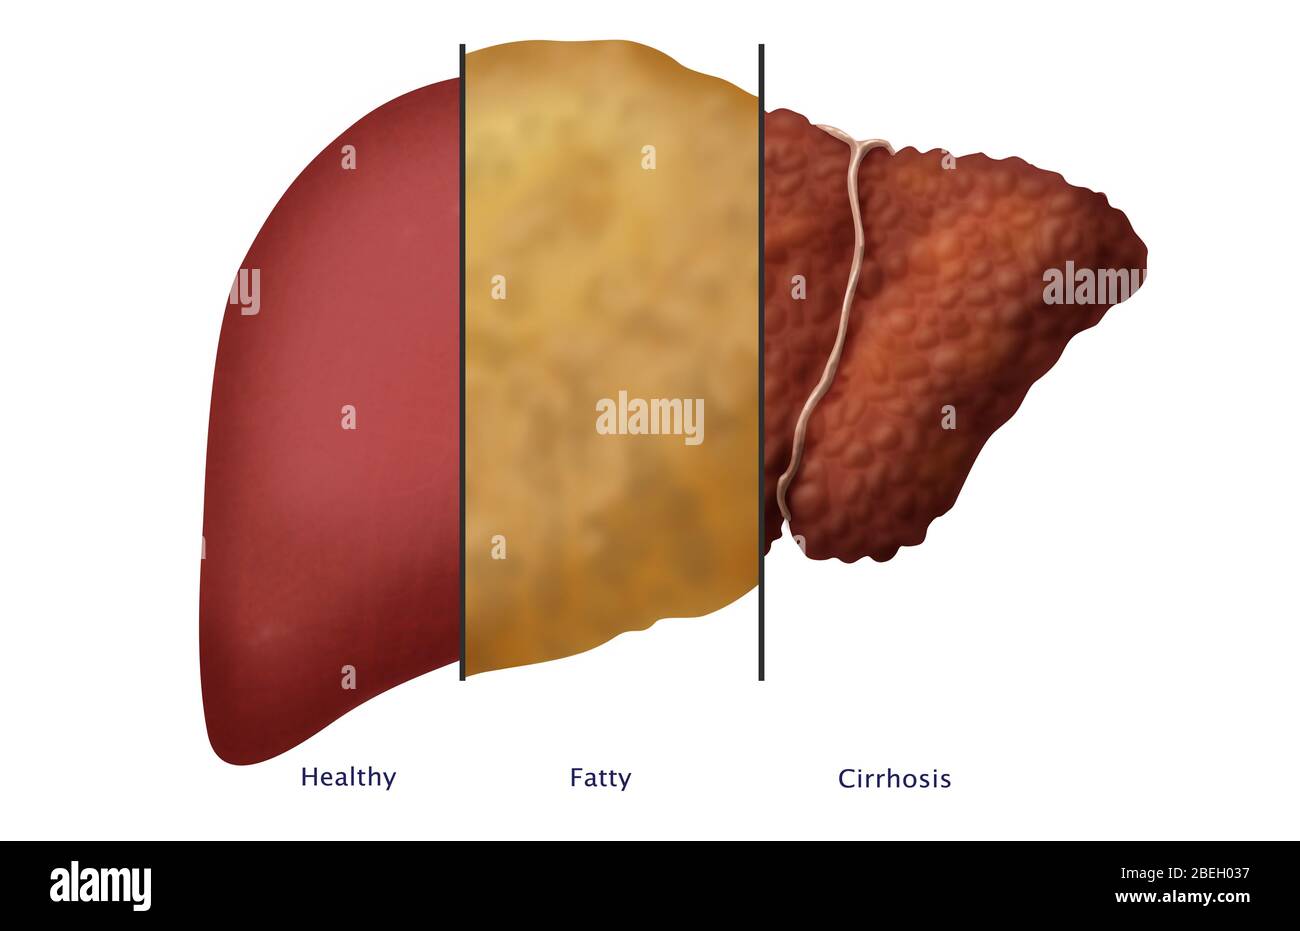 Healthy, Fatty, and Cirrhotic Liver Stock Photo